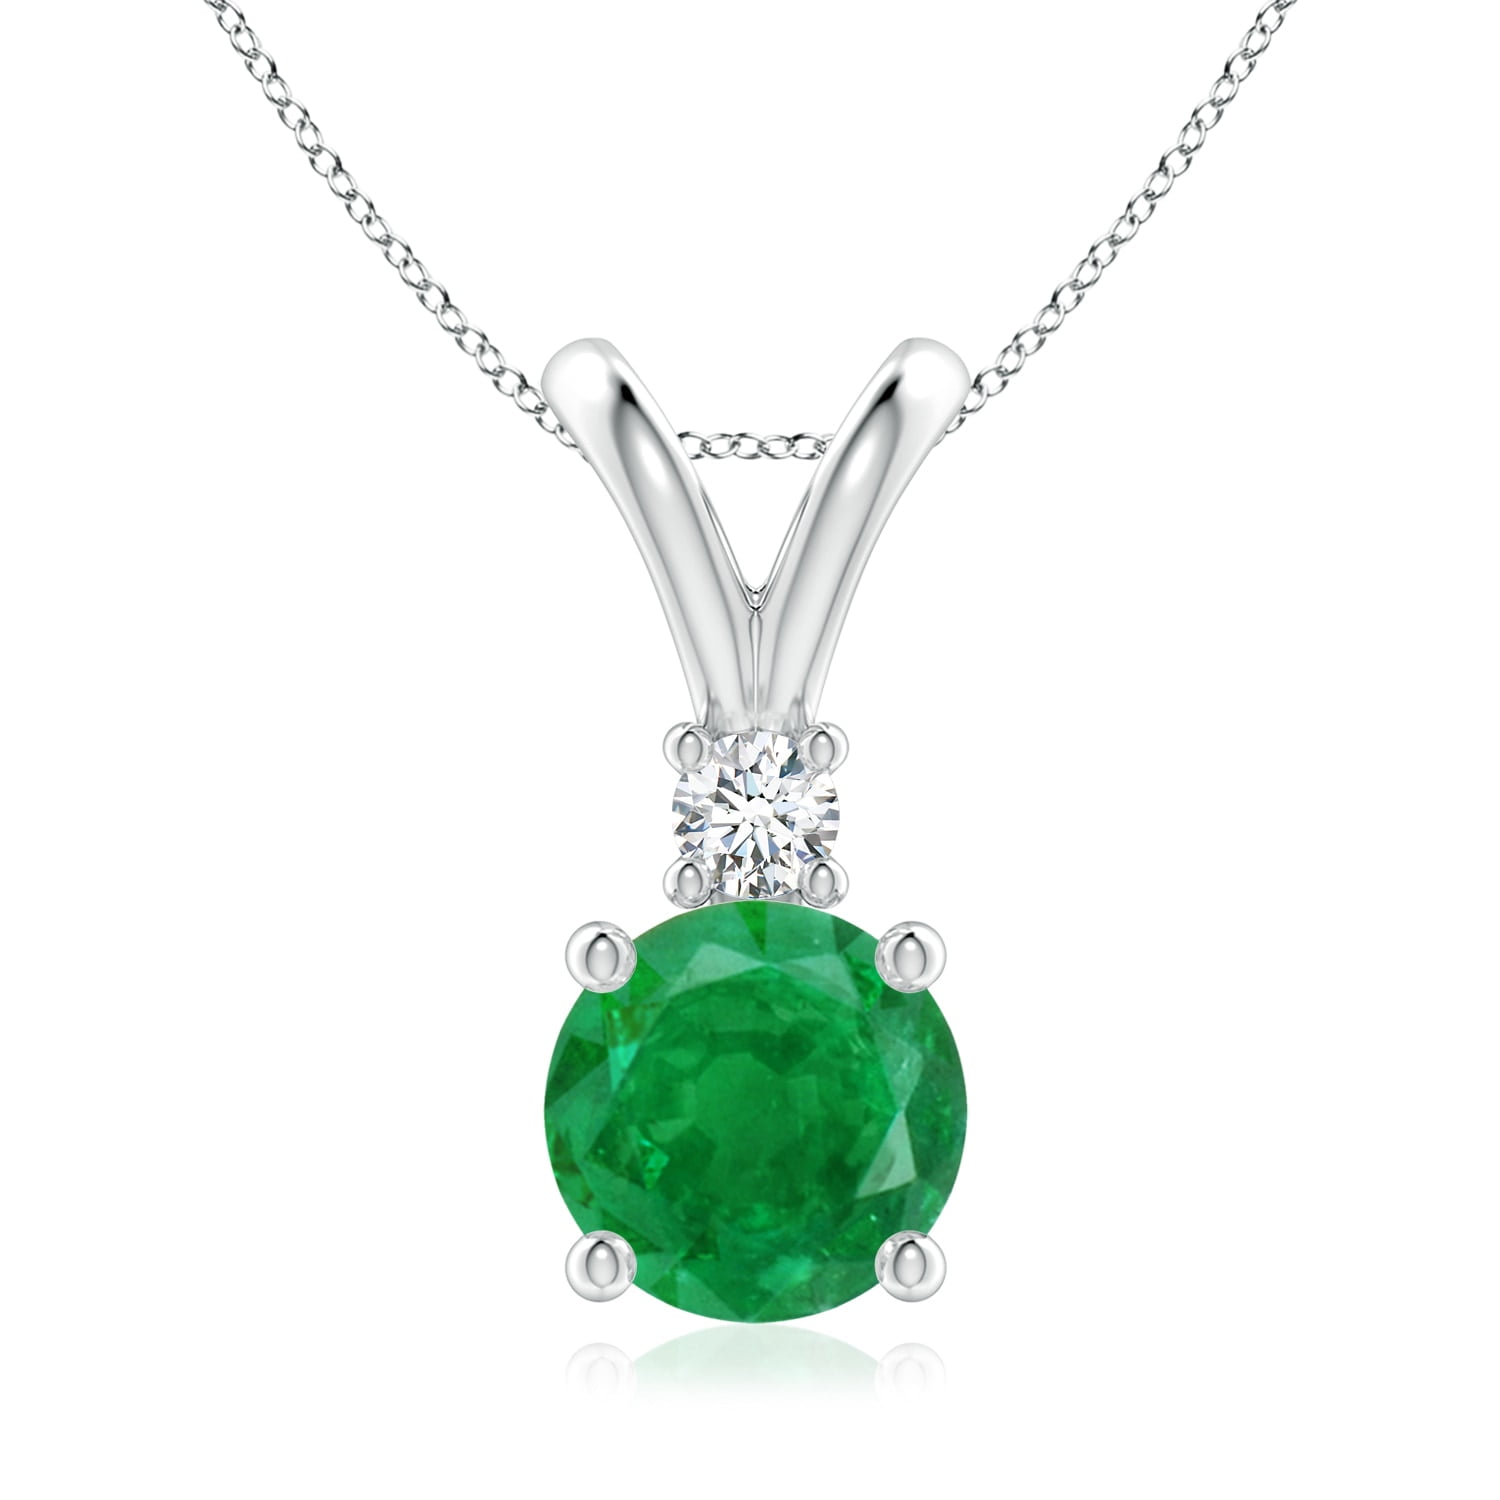 Real Lush Green Emerald Pendant 925 Sterling Silver 2Tone Thanks Giving Jewelry 